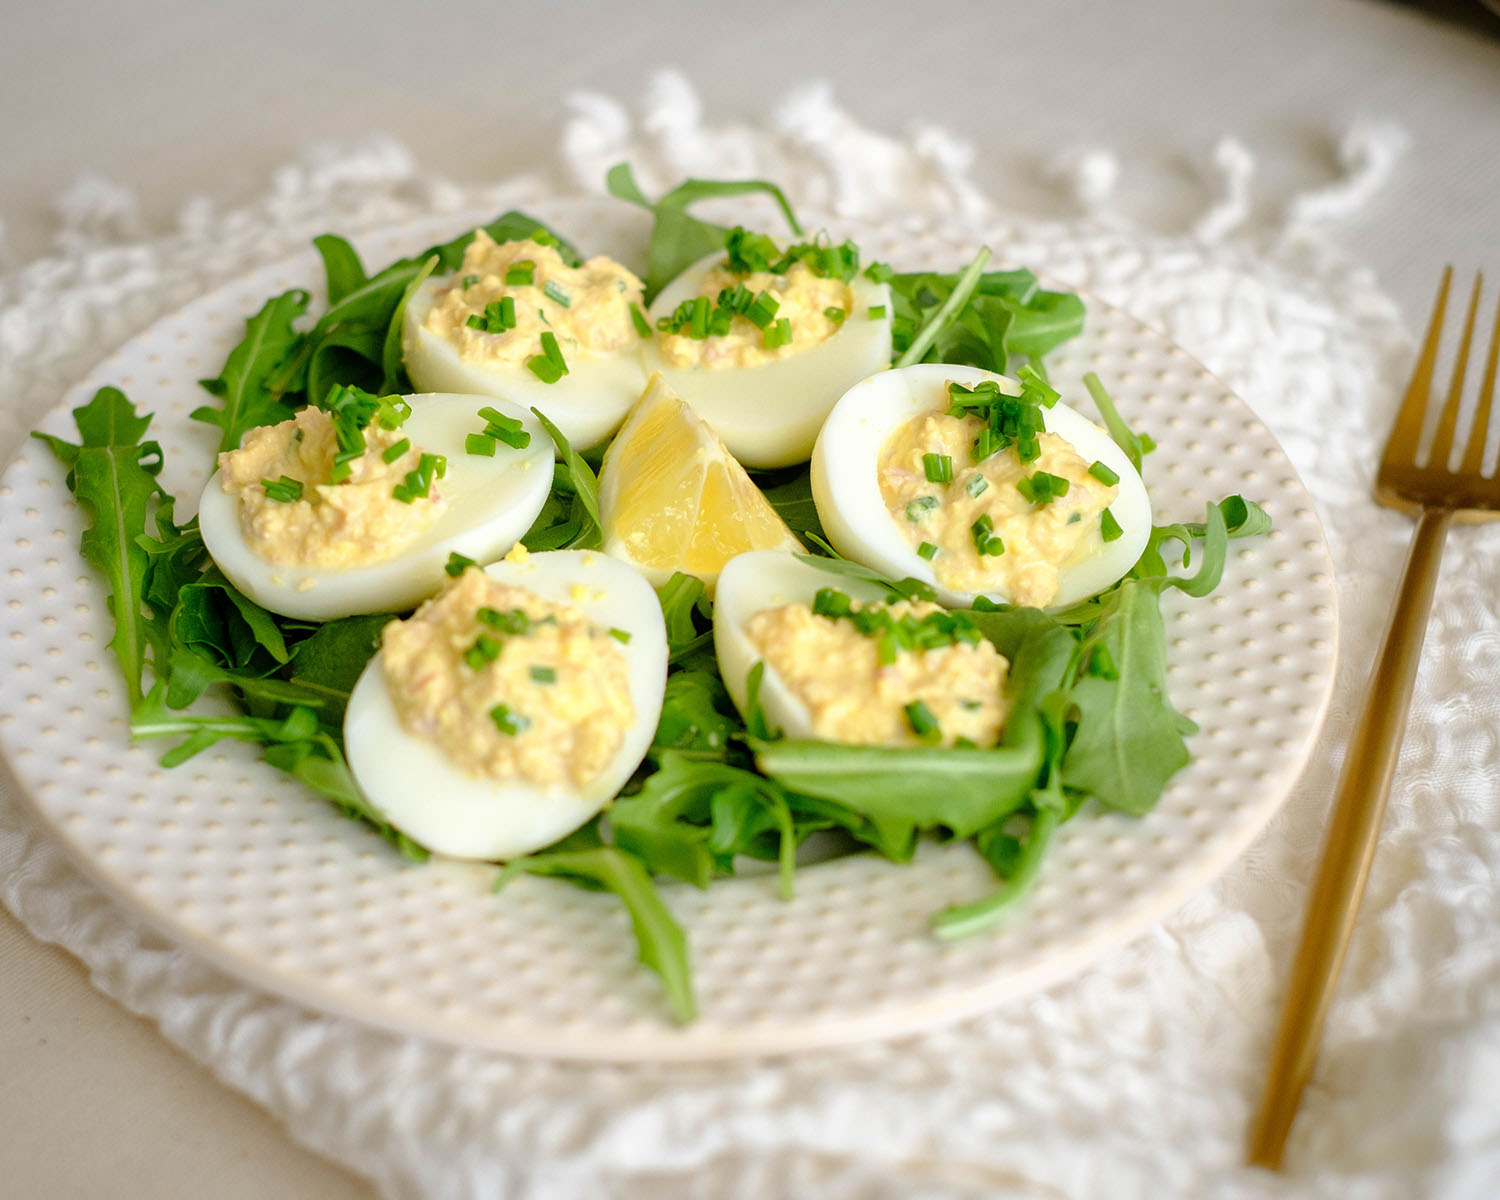 round plate with deviled eggs and arugula salad